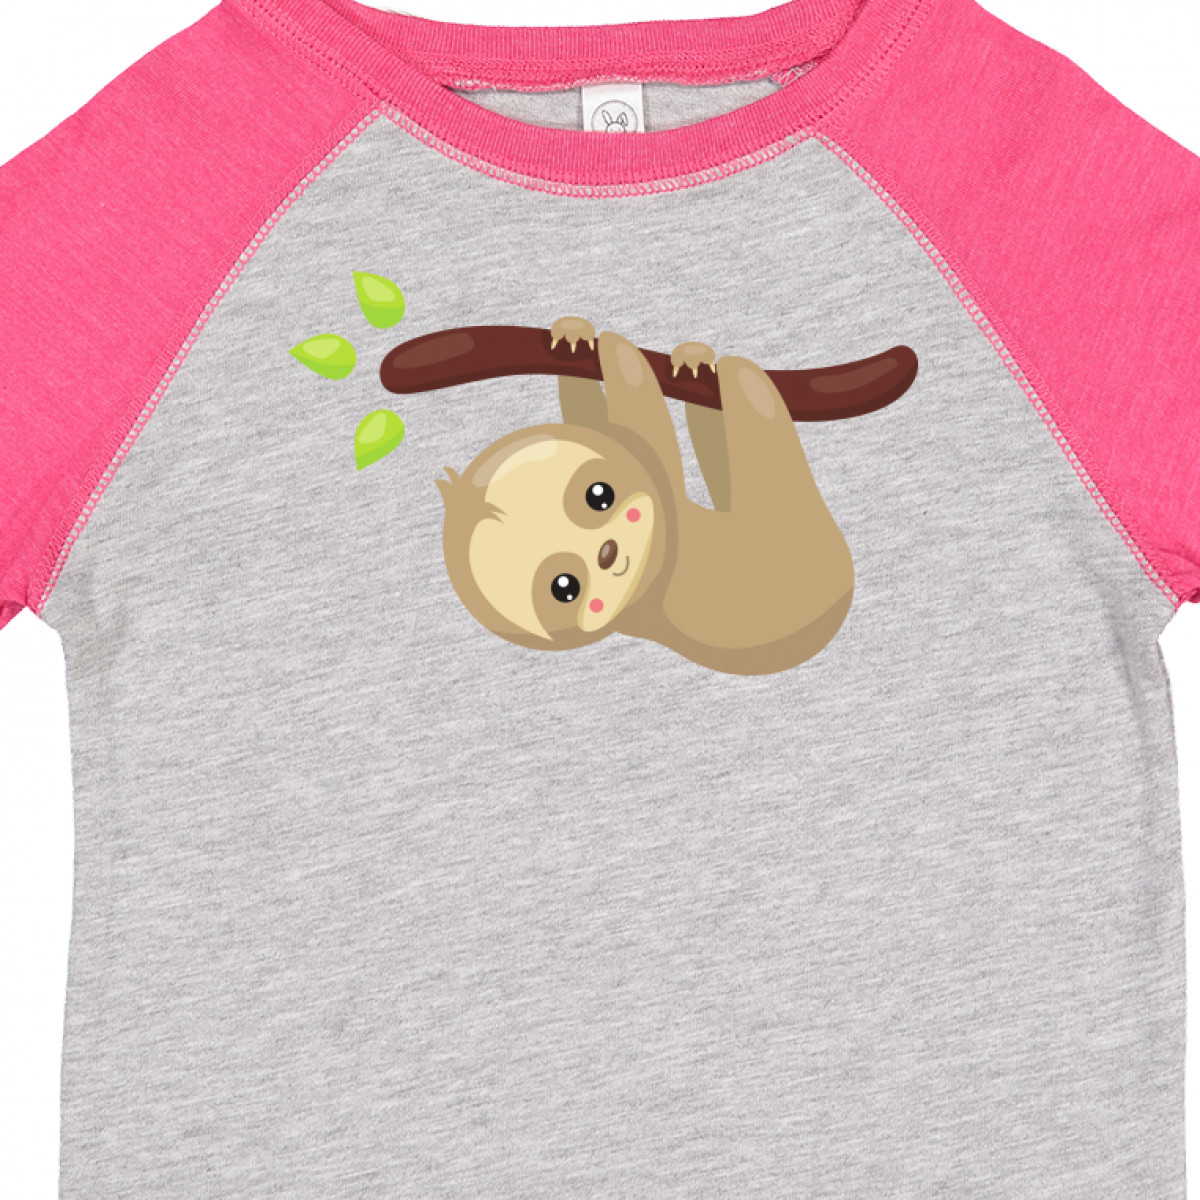 Inktastic Cute Sloth, Little Sloth, Baby Sloth, Lazy Sloth Boys or Girls Toddler T-Shirt - image 3 of 4